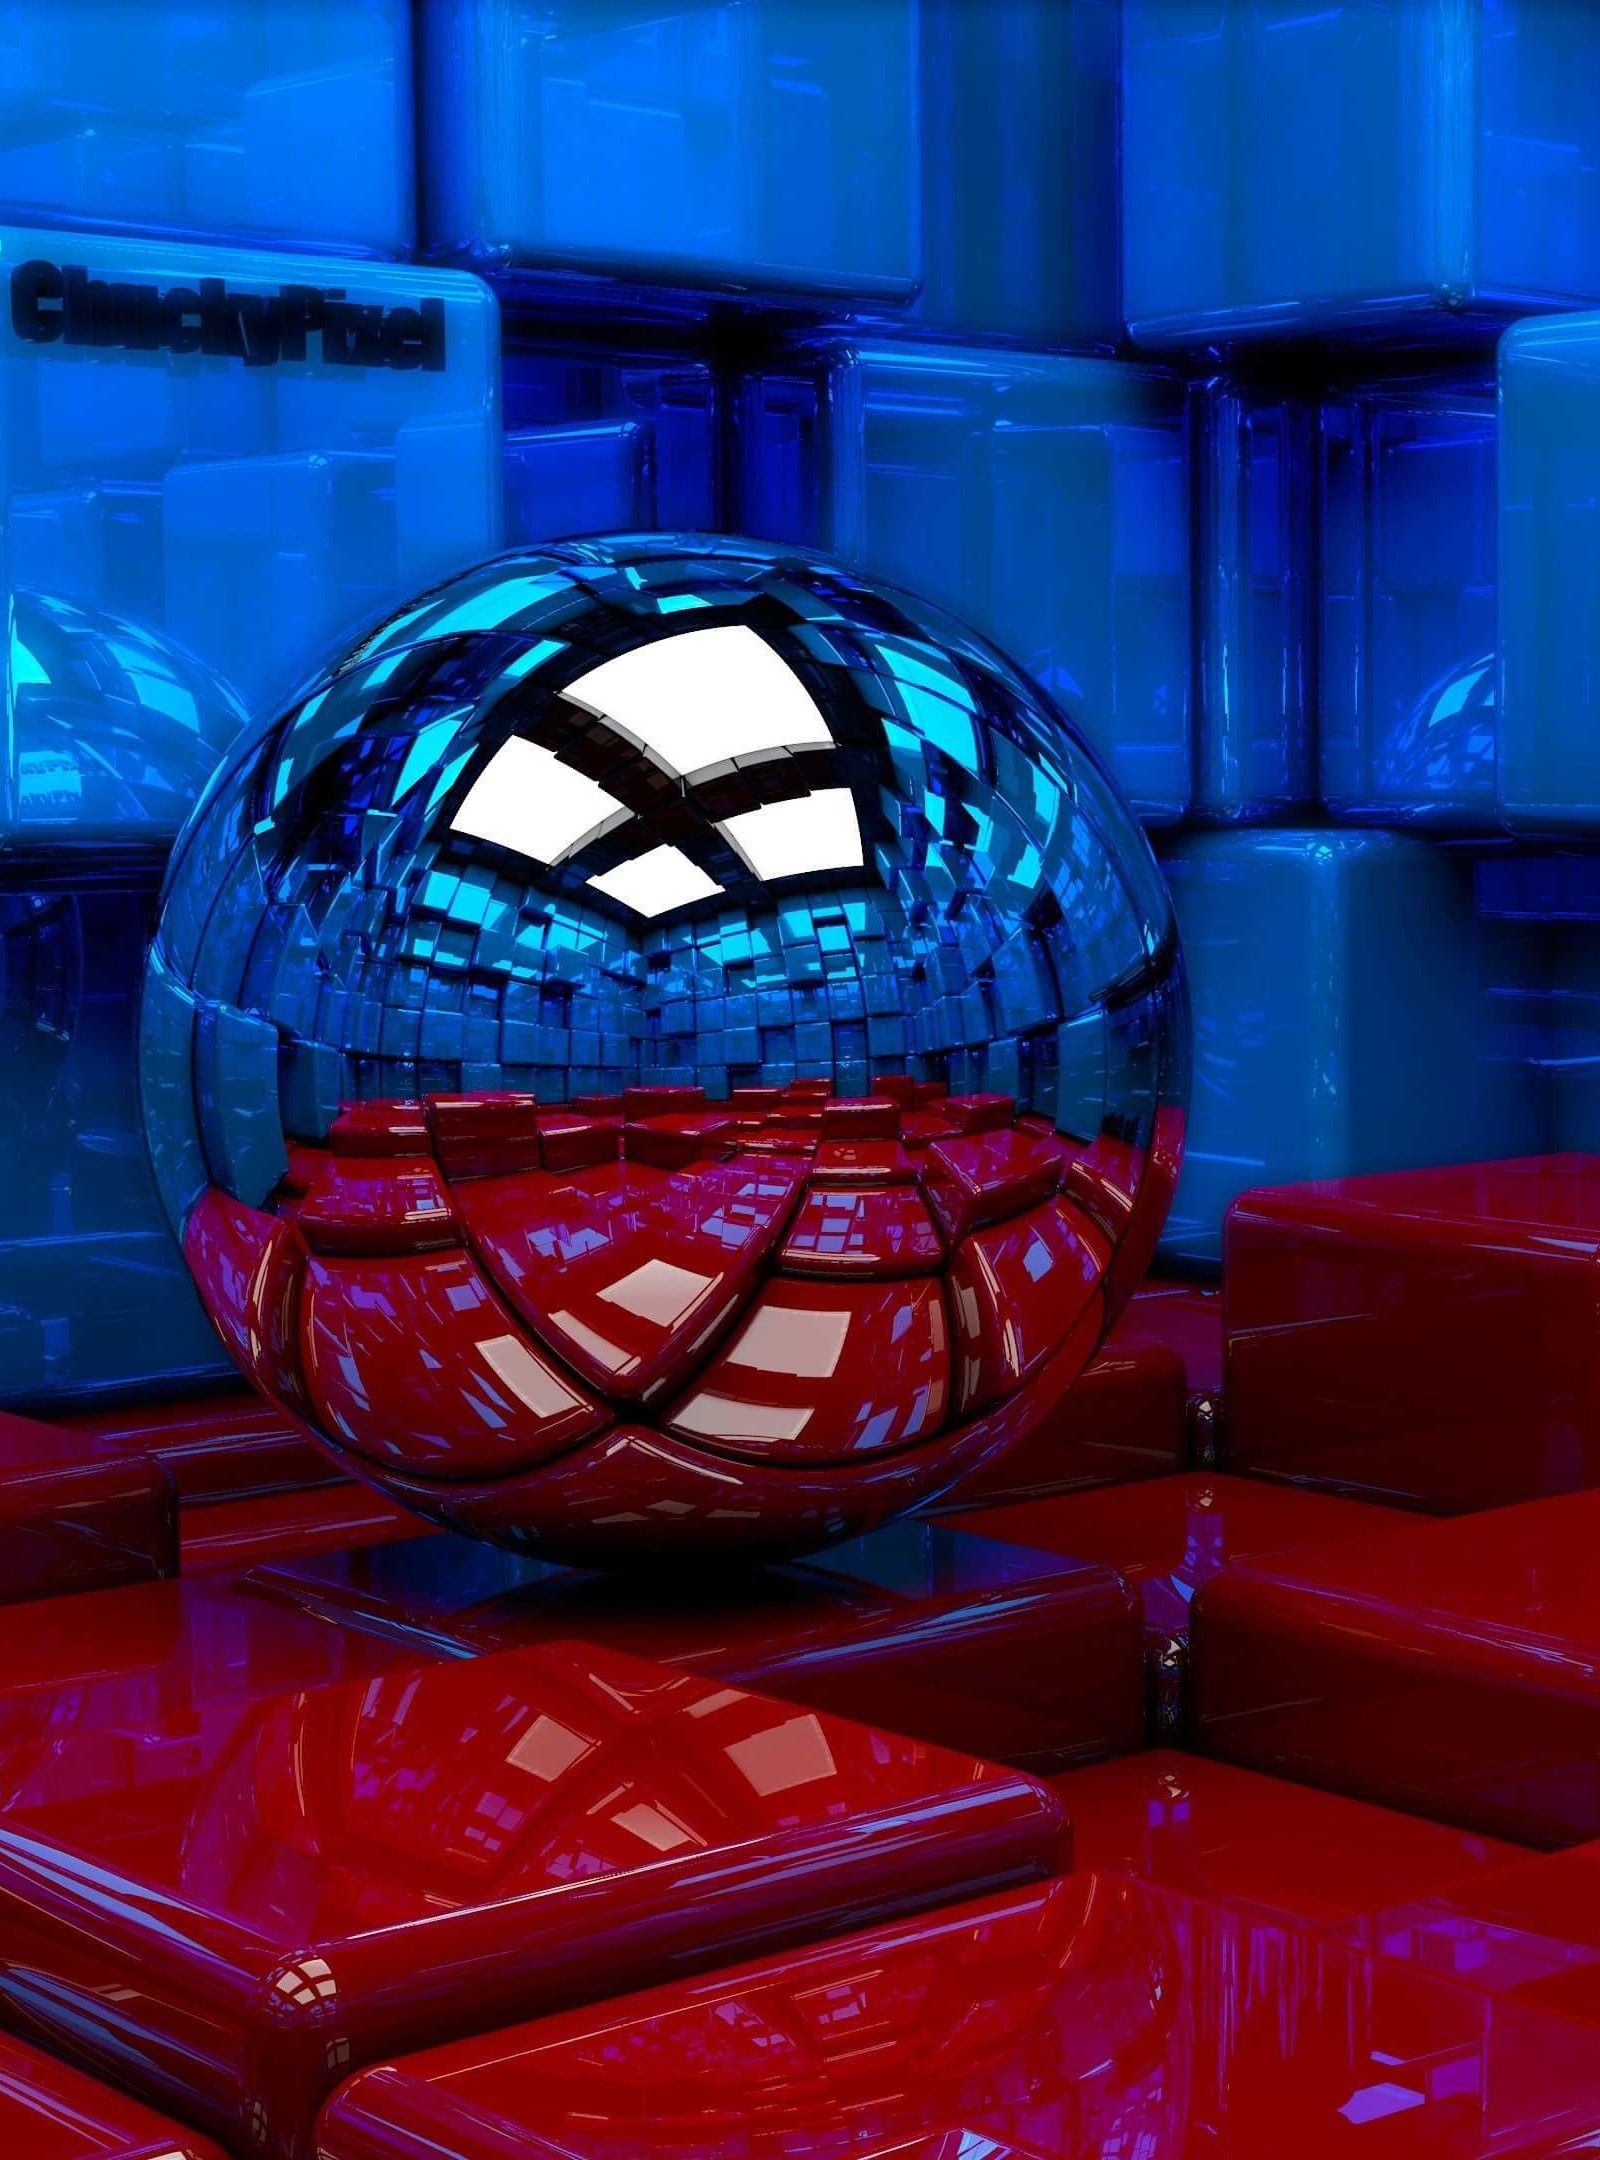 Metallic Sphere Reflecting The Cube Room Wallpaper for Amazon Kindle Fire HDX 8.9